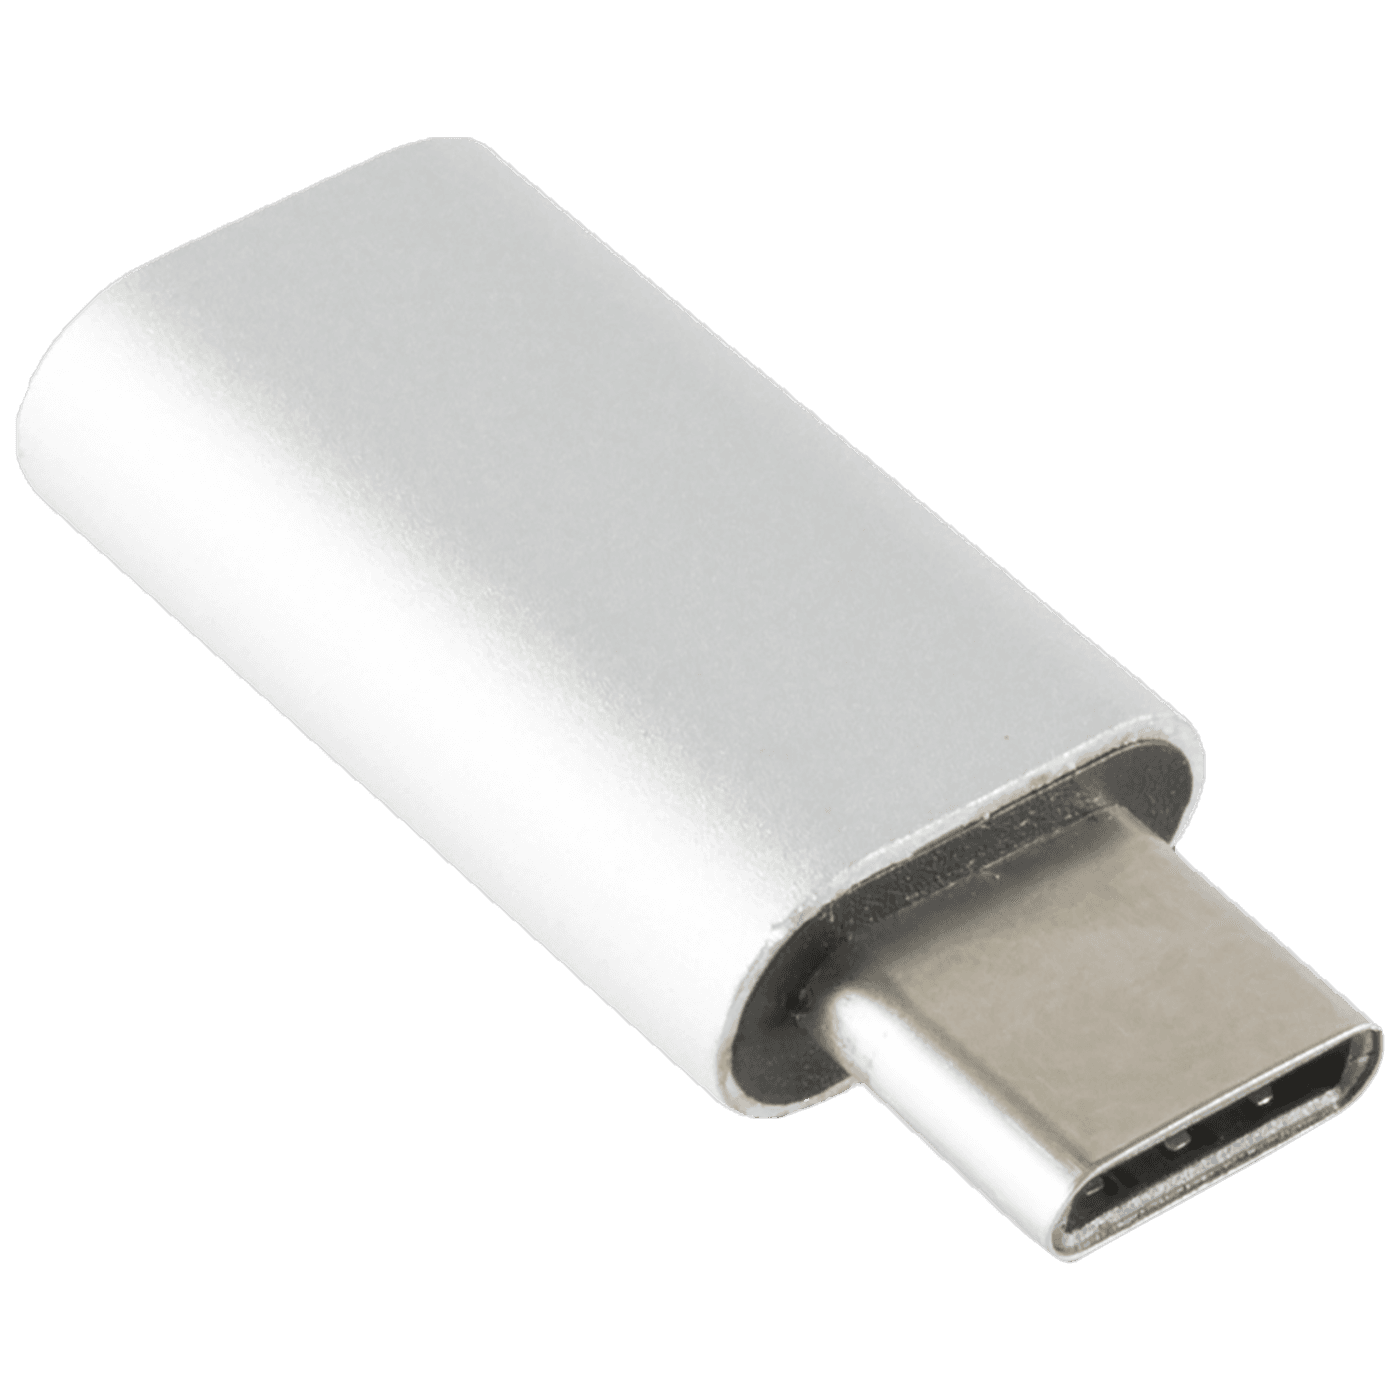 Selected image for SAL Adapter USB type C / micro USB